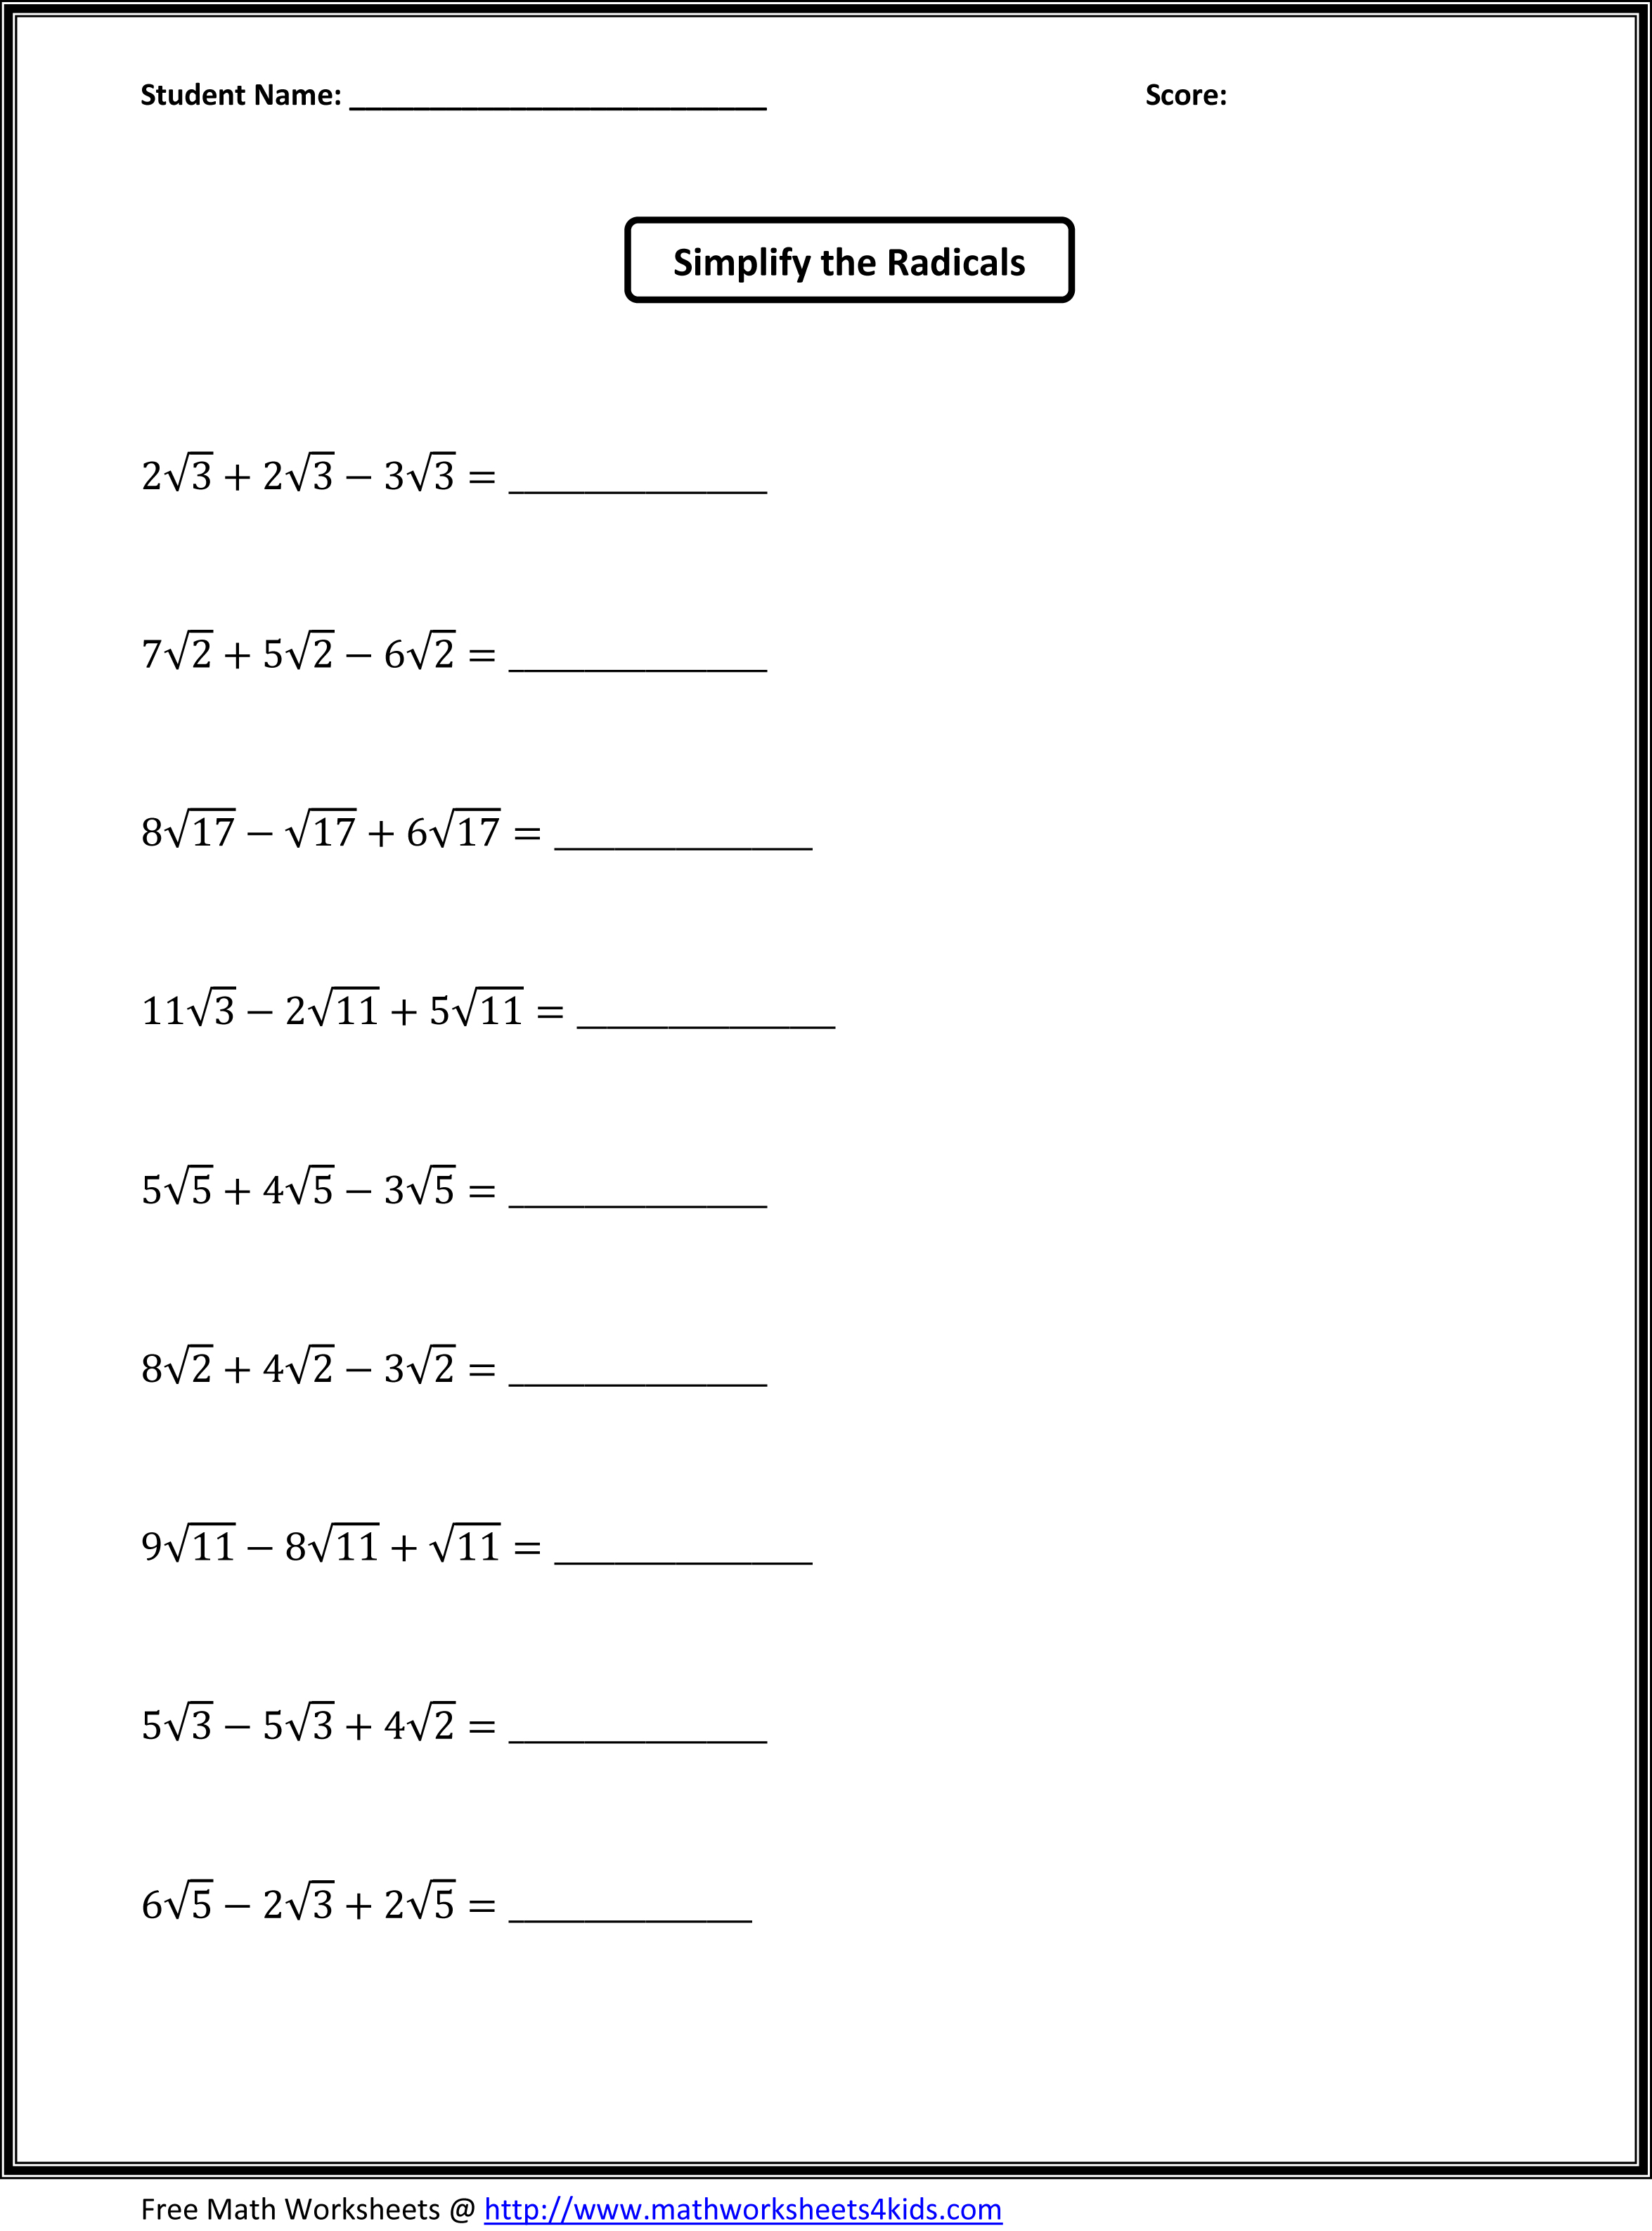 14 Images of 7th Grade Math Worksheets